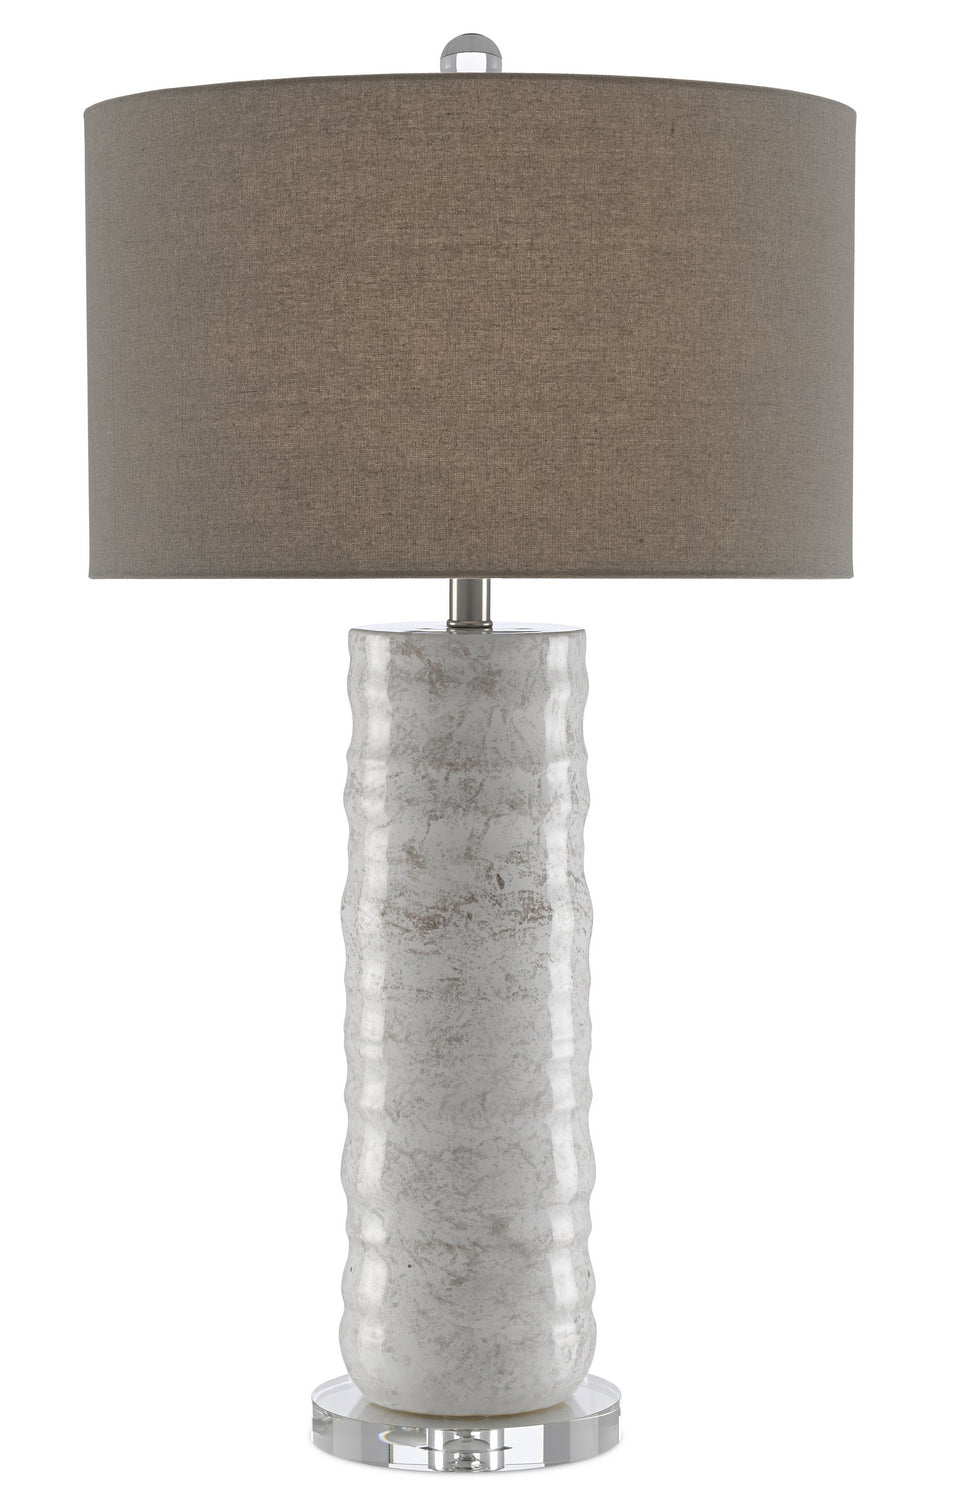 One Light Table Lamp from the Pila collection in Ivory/Taupe finish